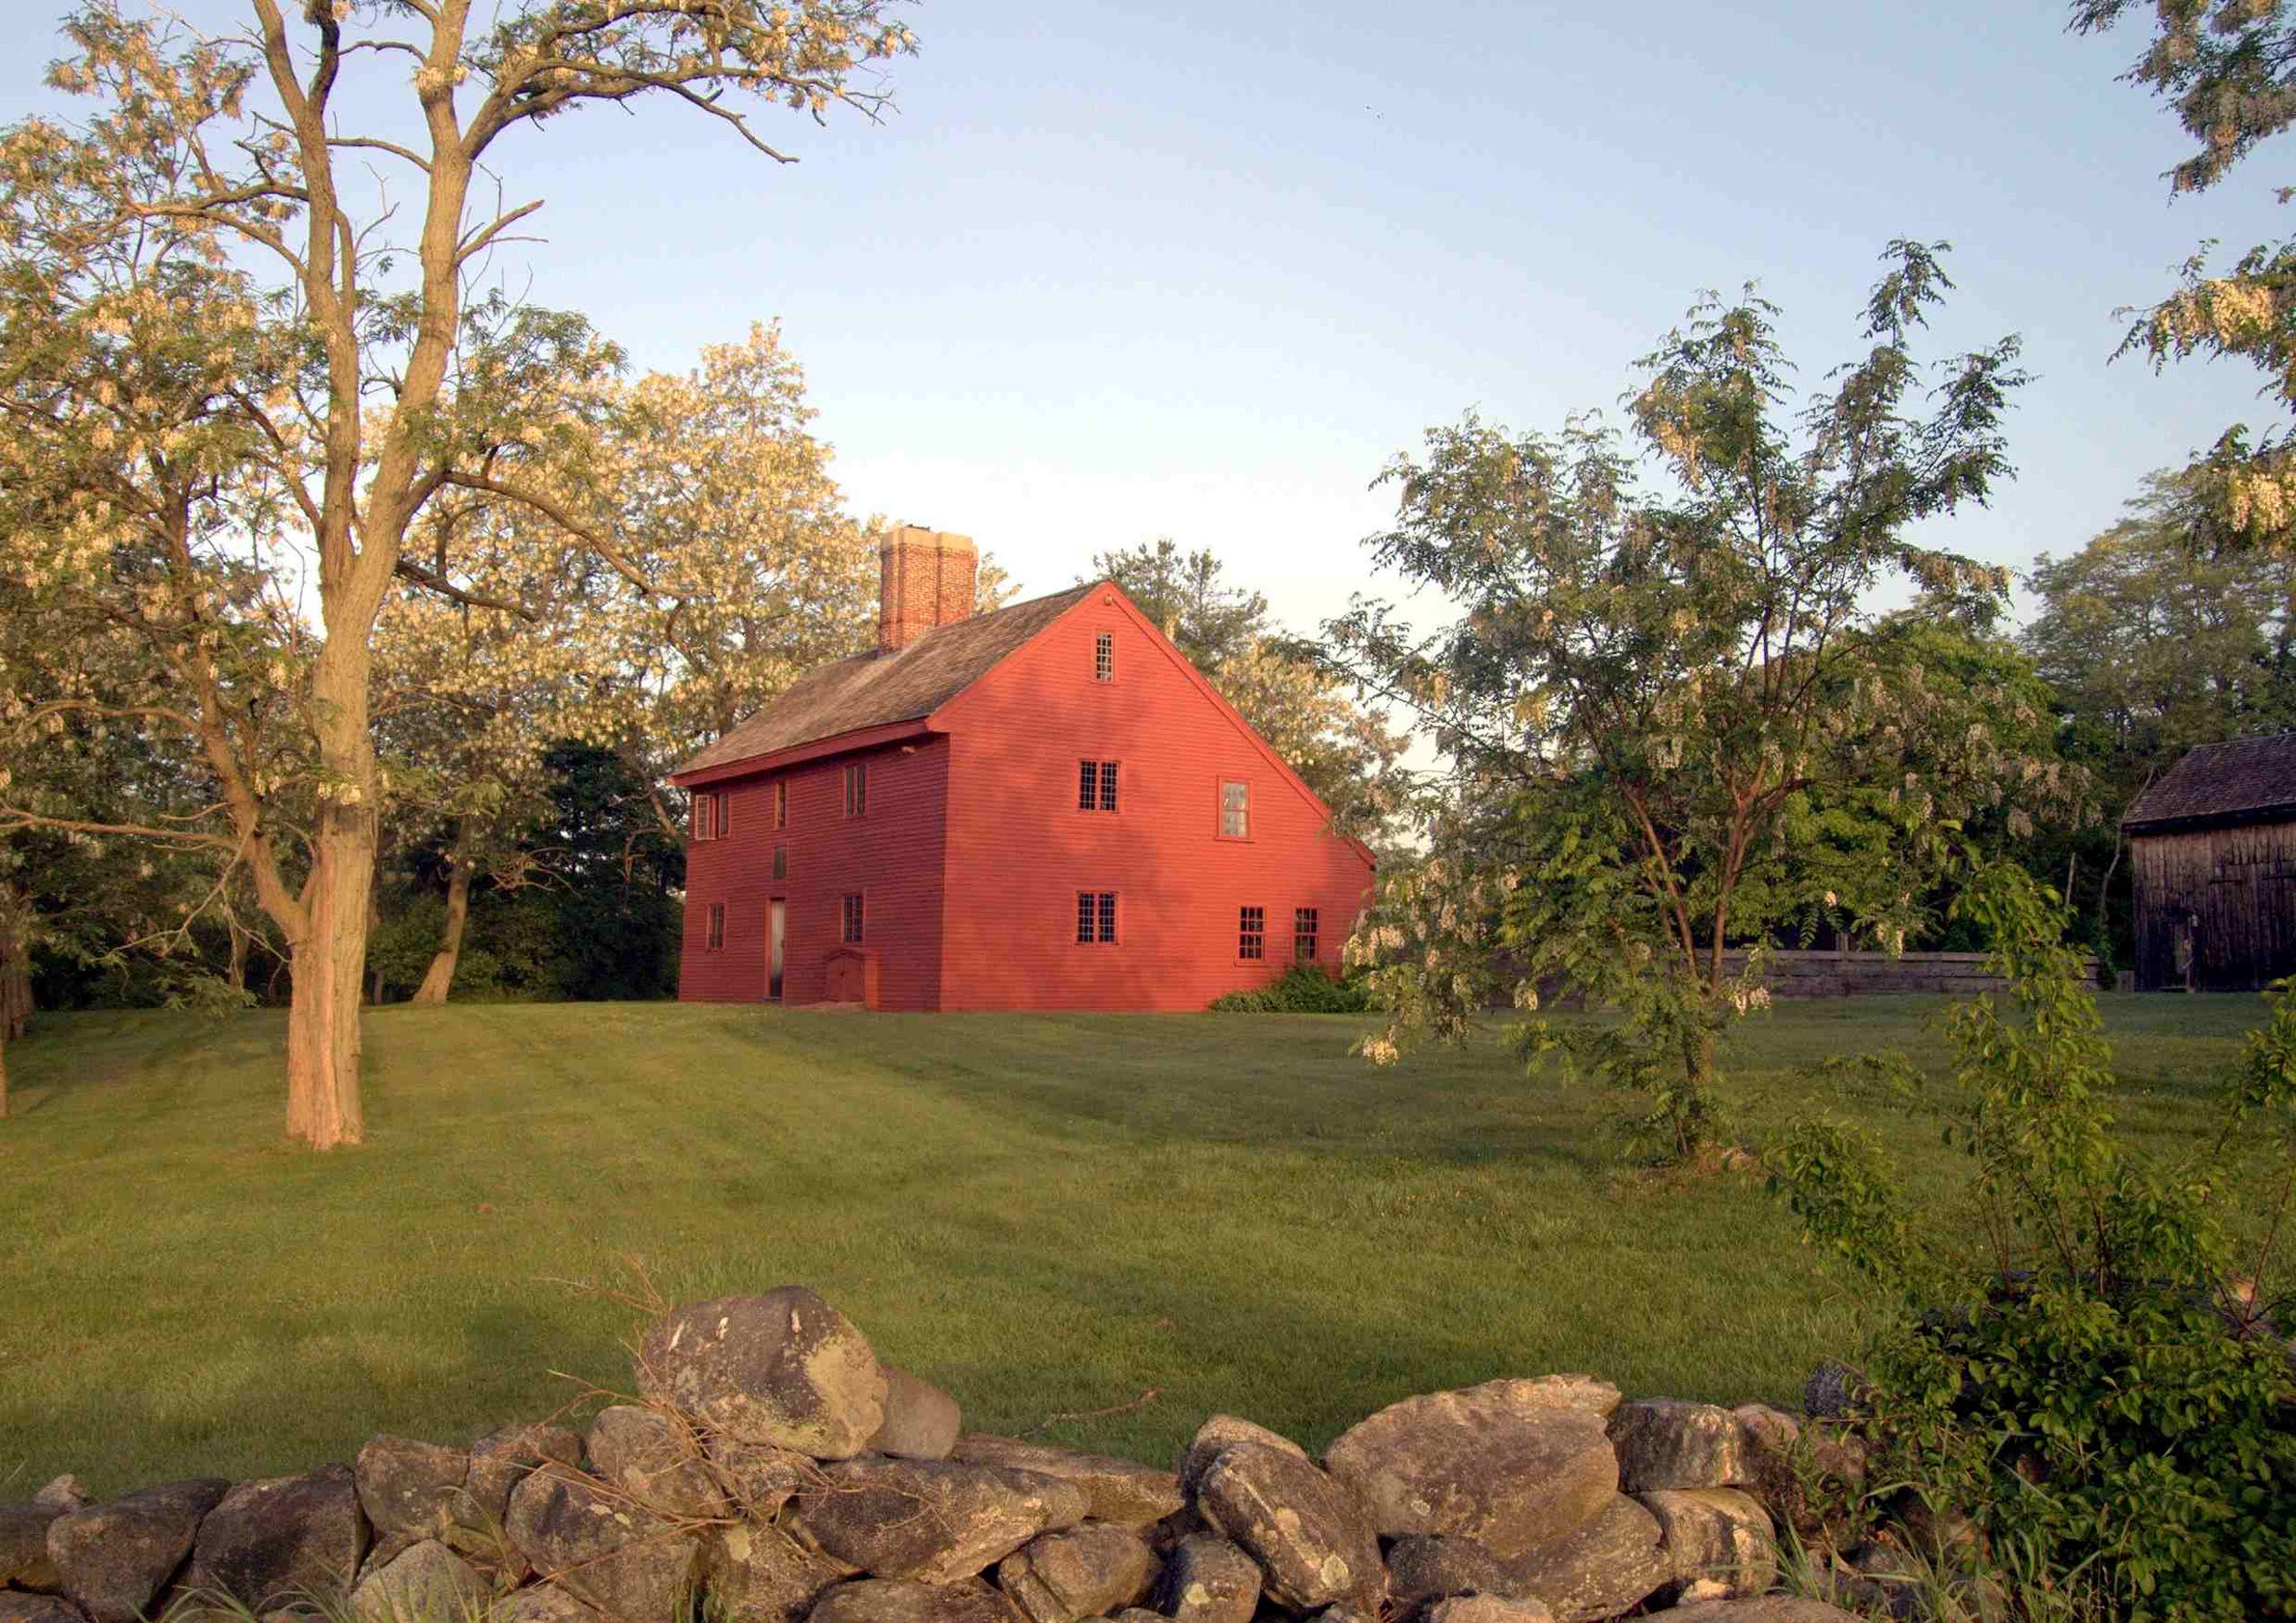 <strong>The Rebecca Nurse Homestead</strong> &bull; Danvers, Massachusetts &bull; Home of Rebecca Nurse, who was convicted and executed in the Salem Witch Trials.